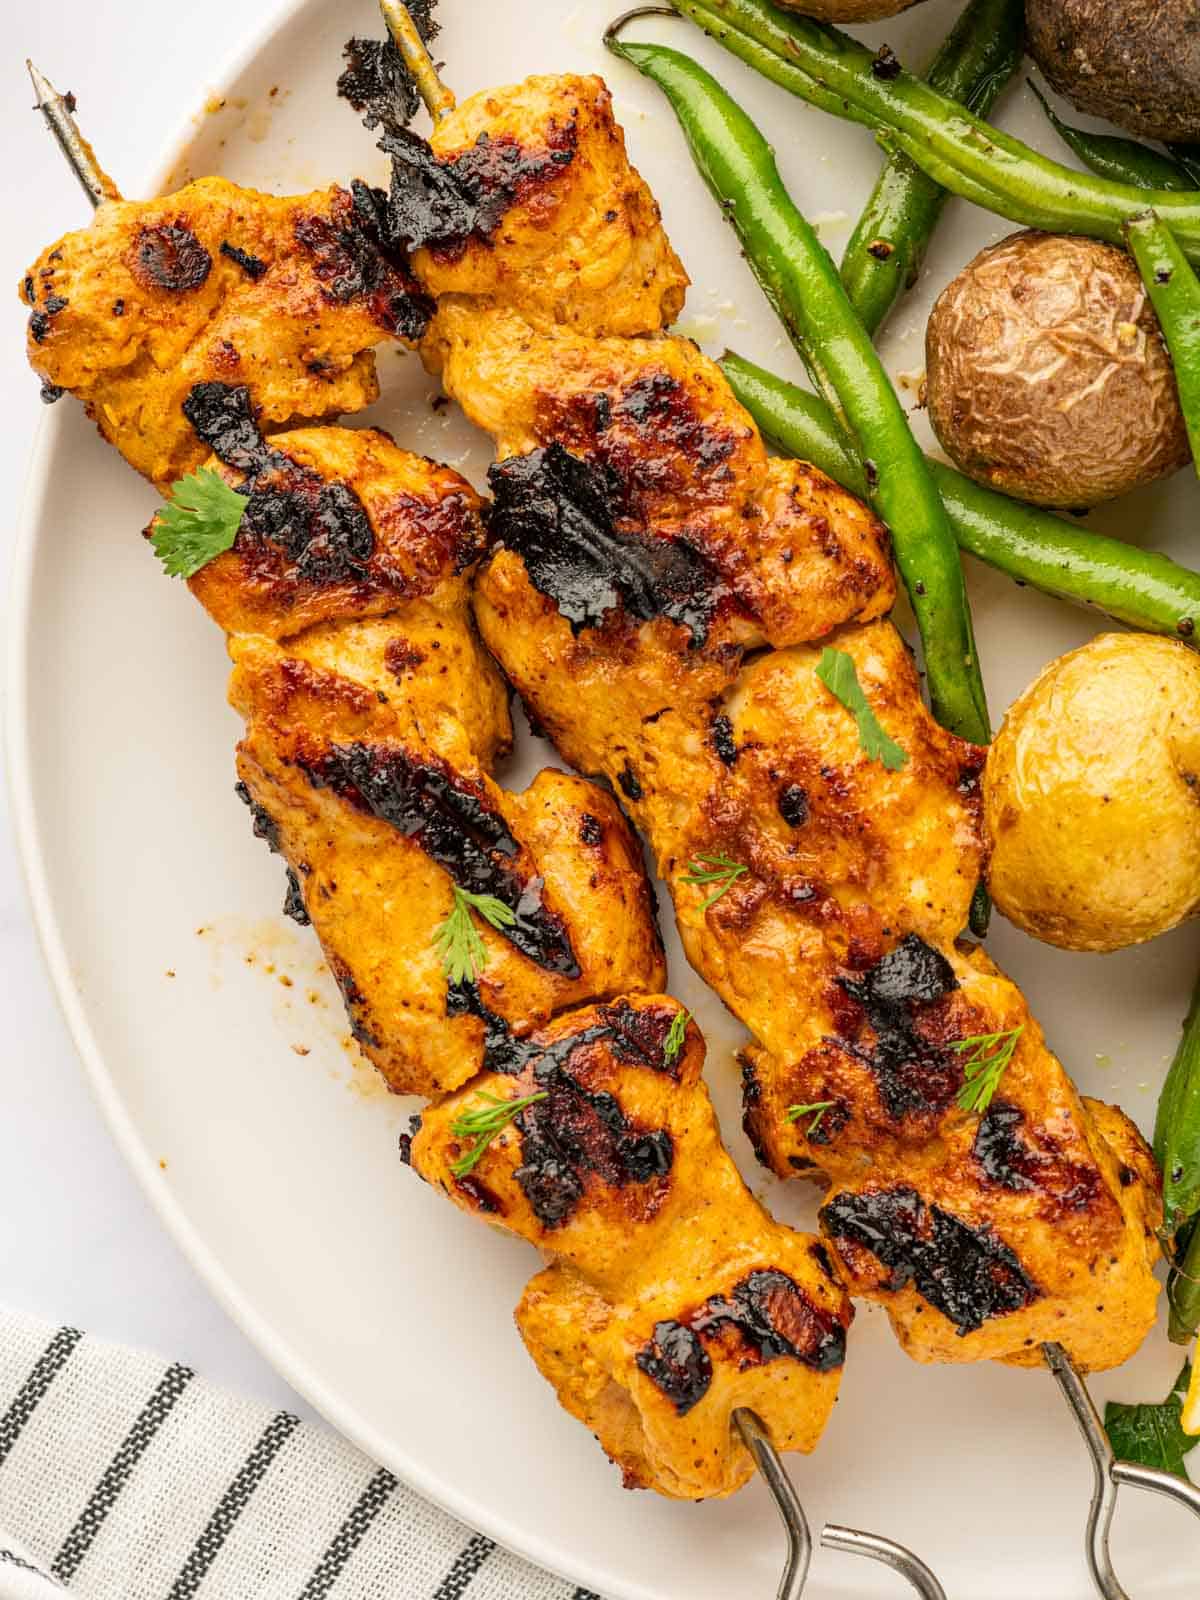 Tandoori chicken skewers on a plate with green beans and roasted potatoes.